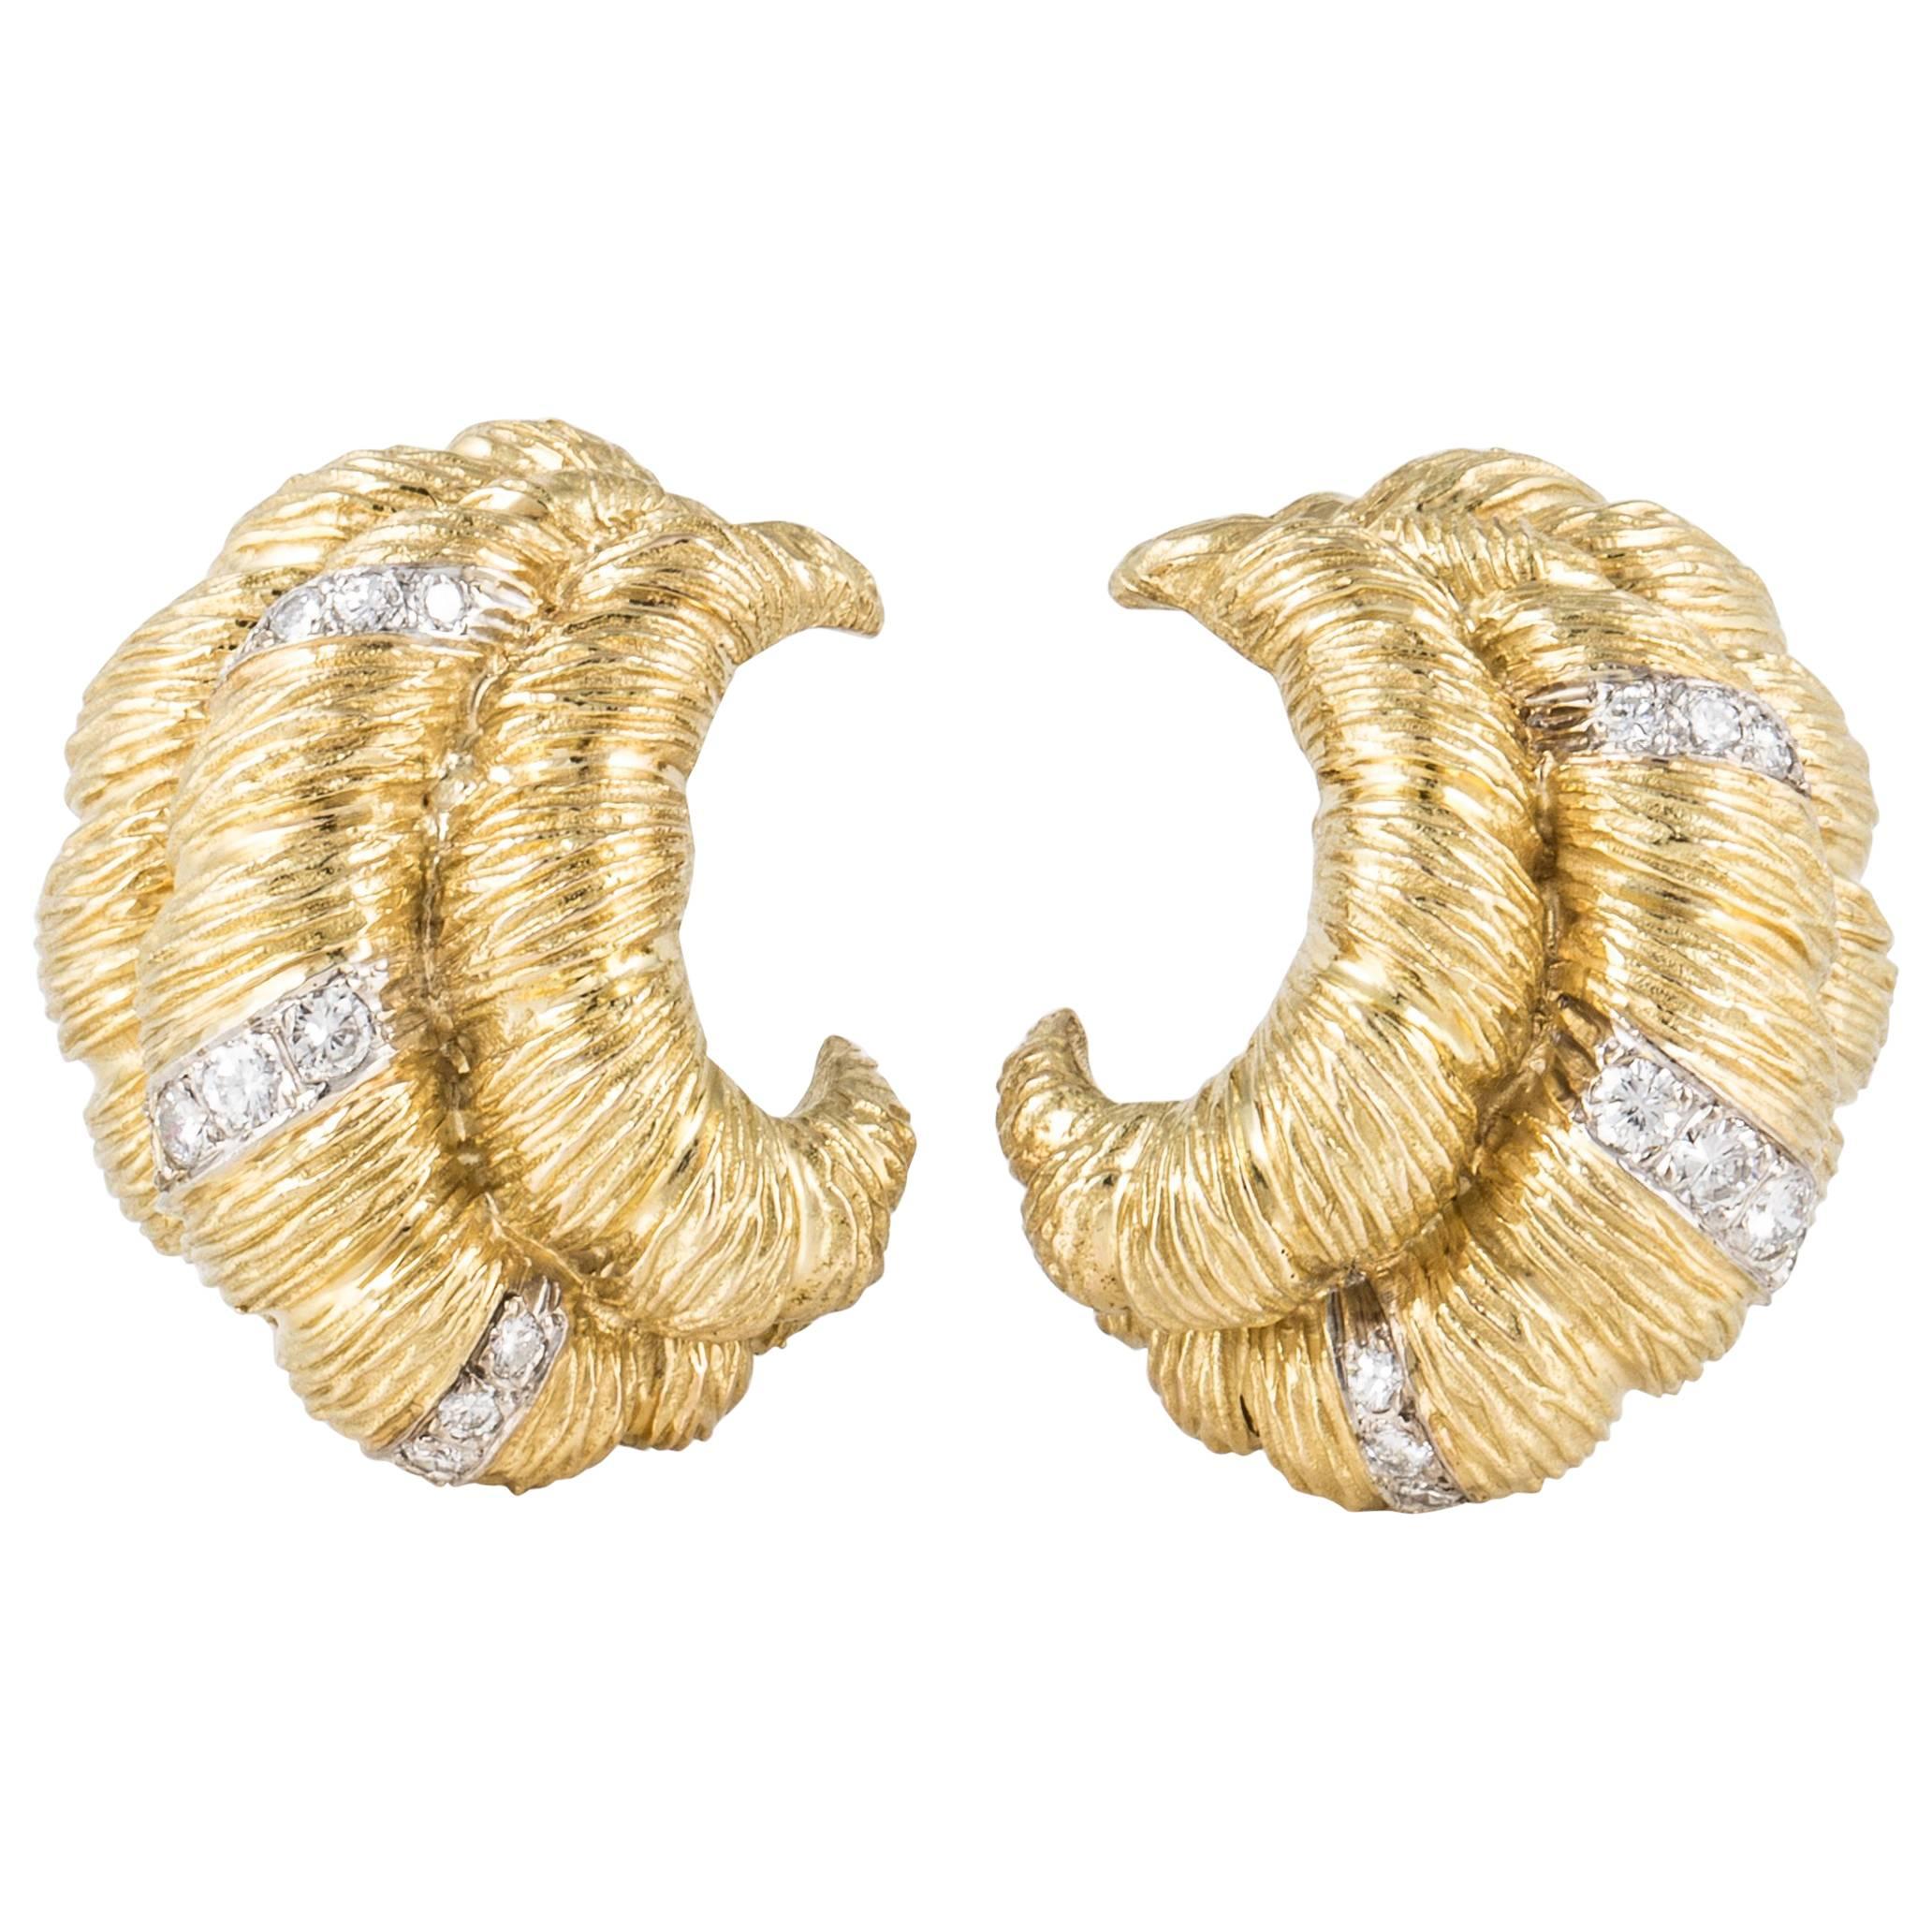 18K Textured Yellow Gold Earrings with Diamonds